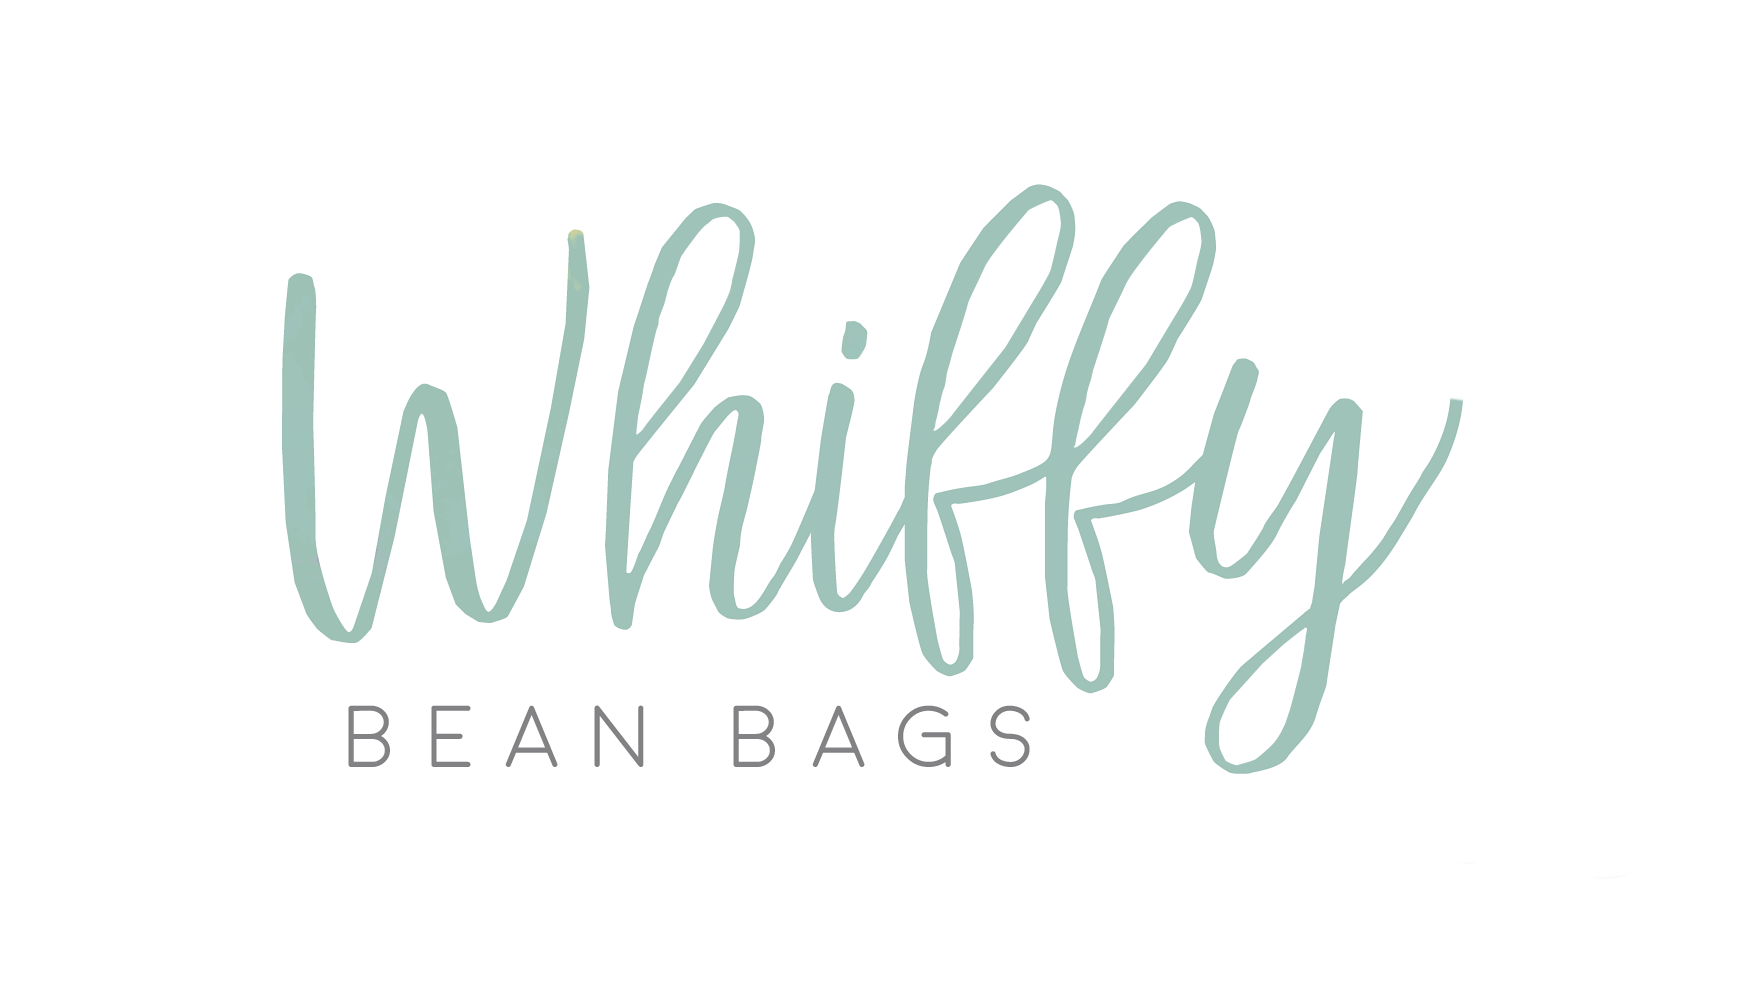 Whiffy Bean Bags logo. Whiffy is written in light green cursive and bean bags are in gray printing.